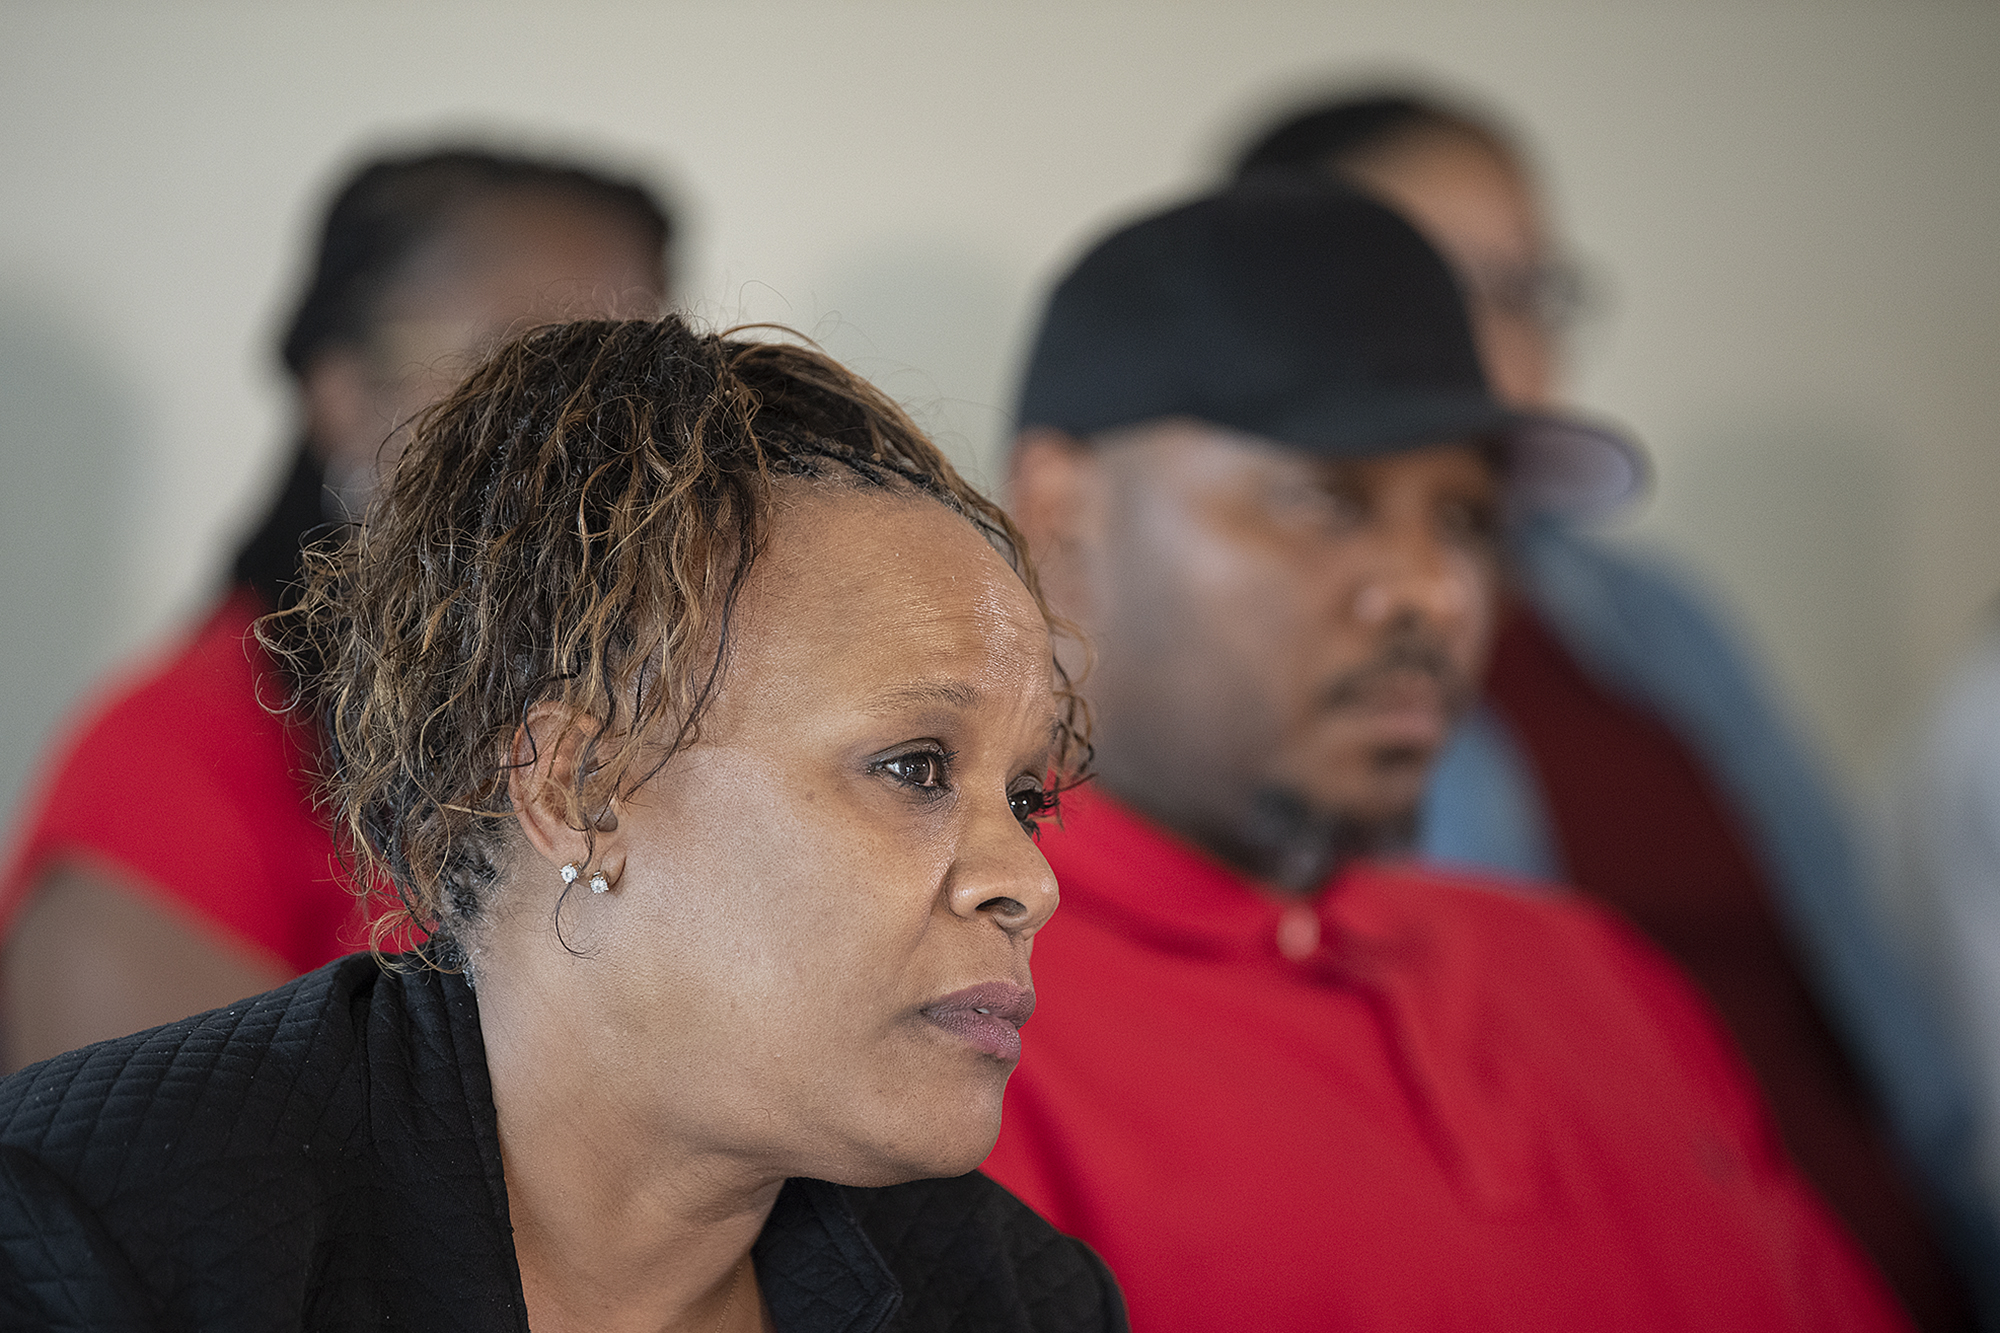 Tammi Bell, foreground, mother of Kevin Peterson Jr., joins his father, Kevin Peterson Sr., and other family members during a press conference as they announce a lawsuit against the Clark County Sheriff's Office after the 21-year-old Black man was shot in 2020, as seen at the Aero Club on Thursday afternoon, May 26, 2022.